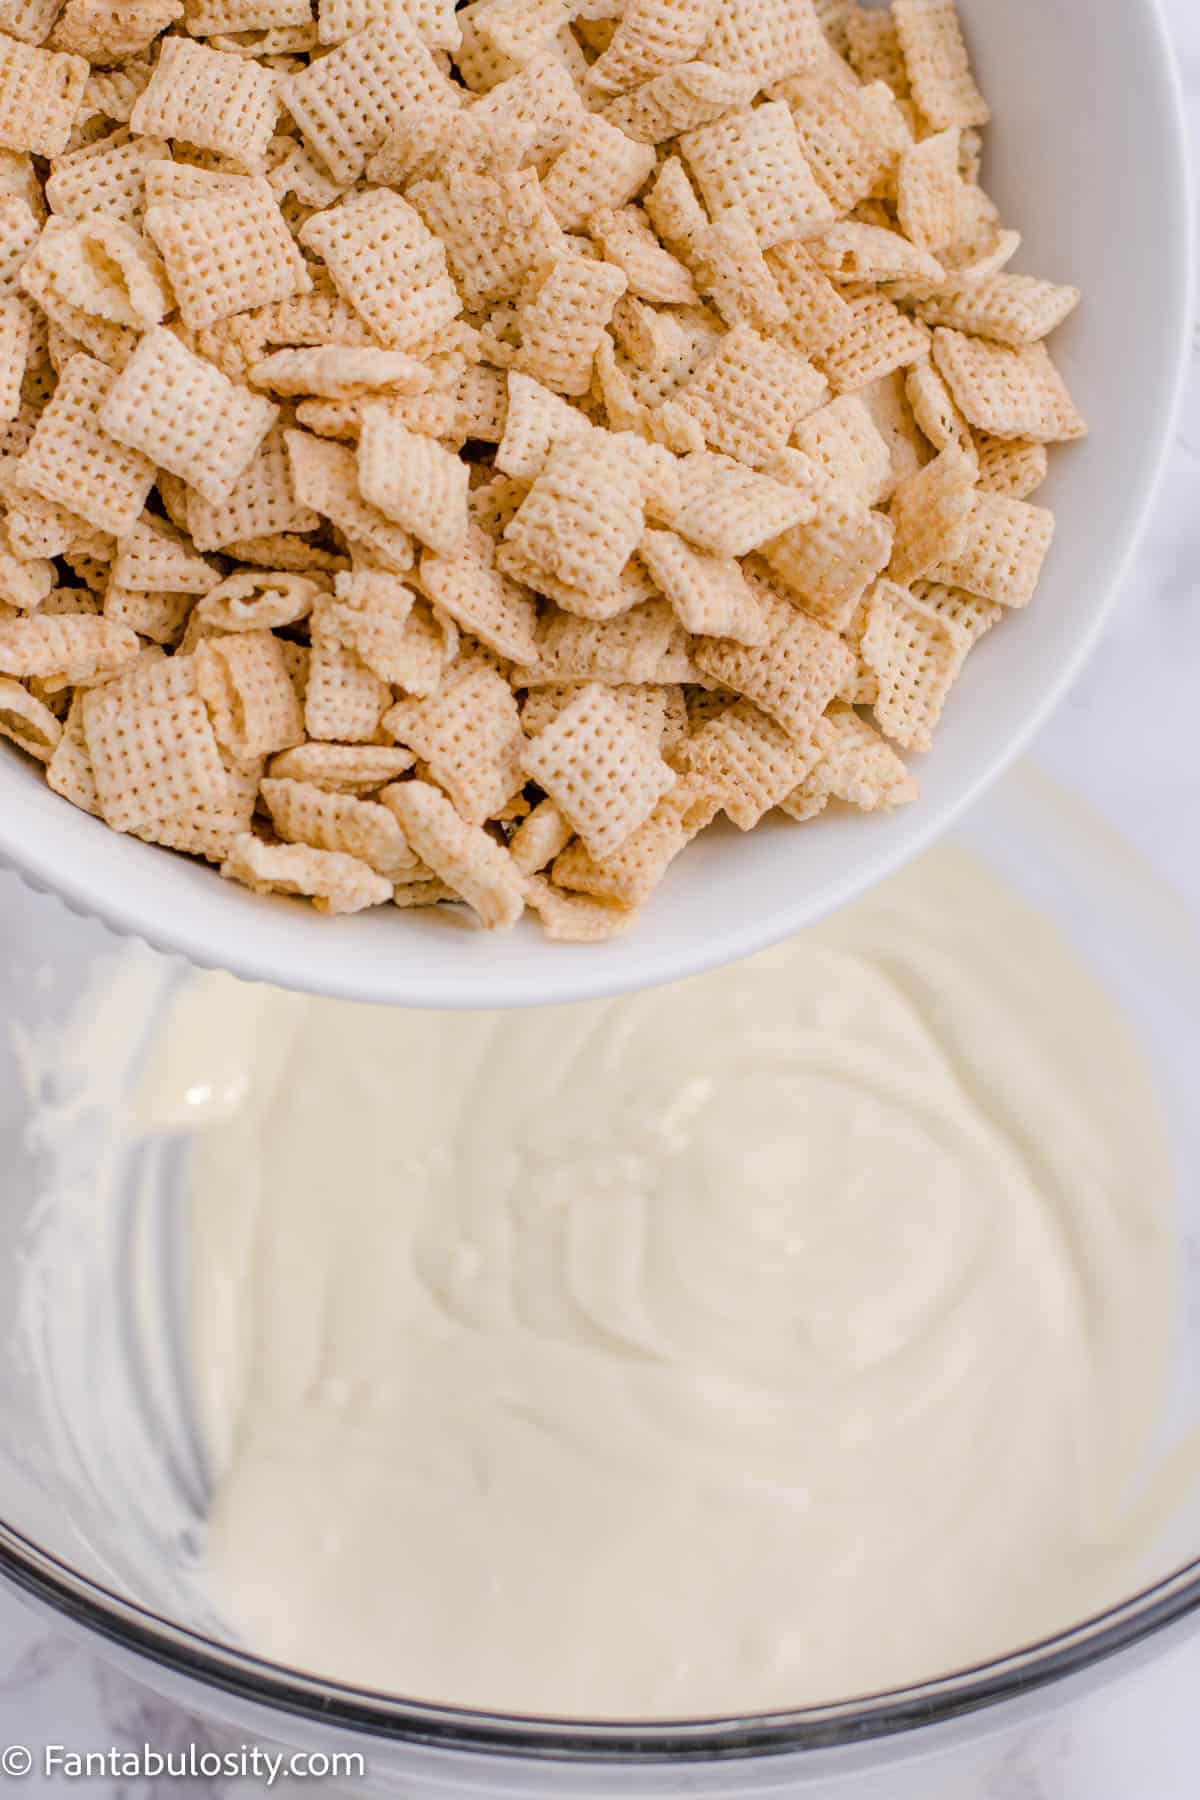 A bowl of cereal about to be poured into a bowl of melted white chocolate.